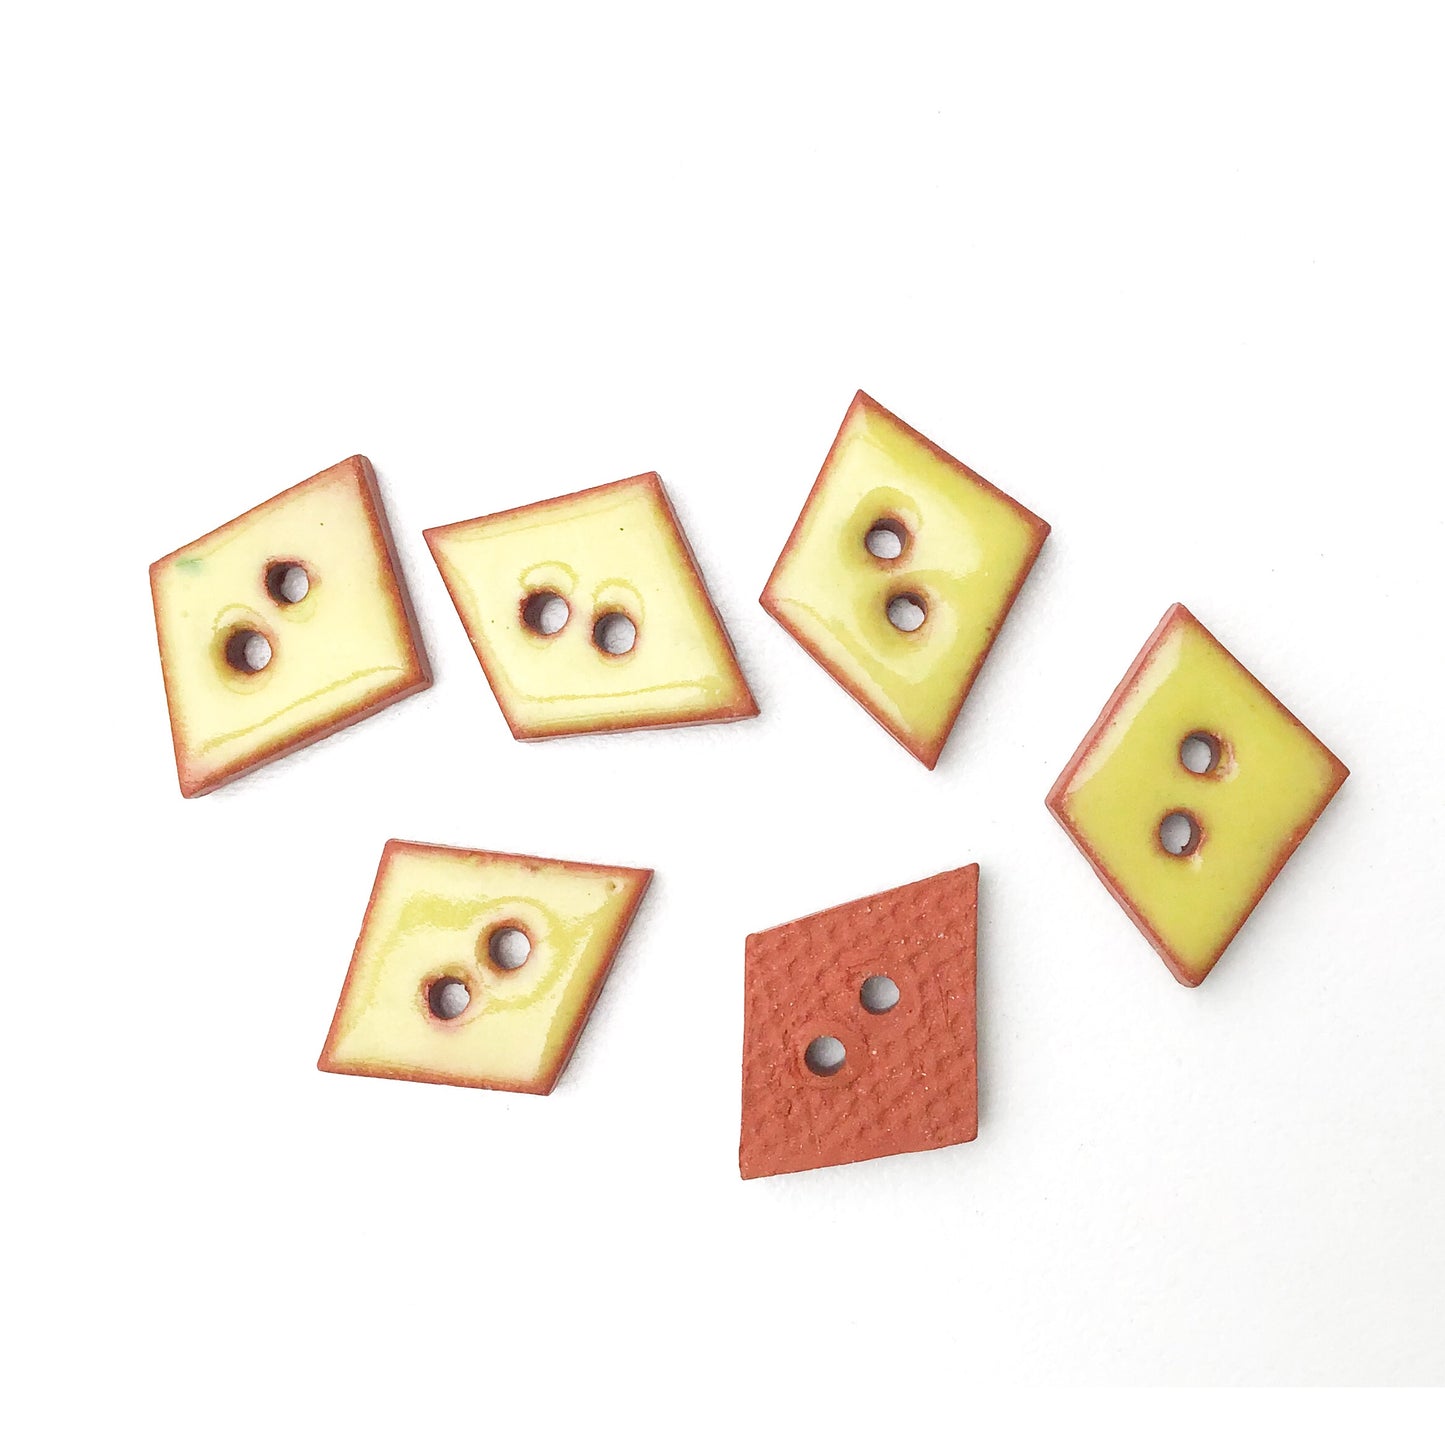 Chartreuse Ceramic Buttons on Red Clay - Small Geometric Ceramic Buttons - 1/2" - 6 Pack